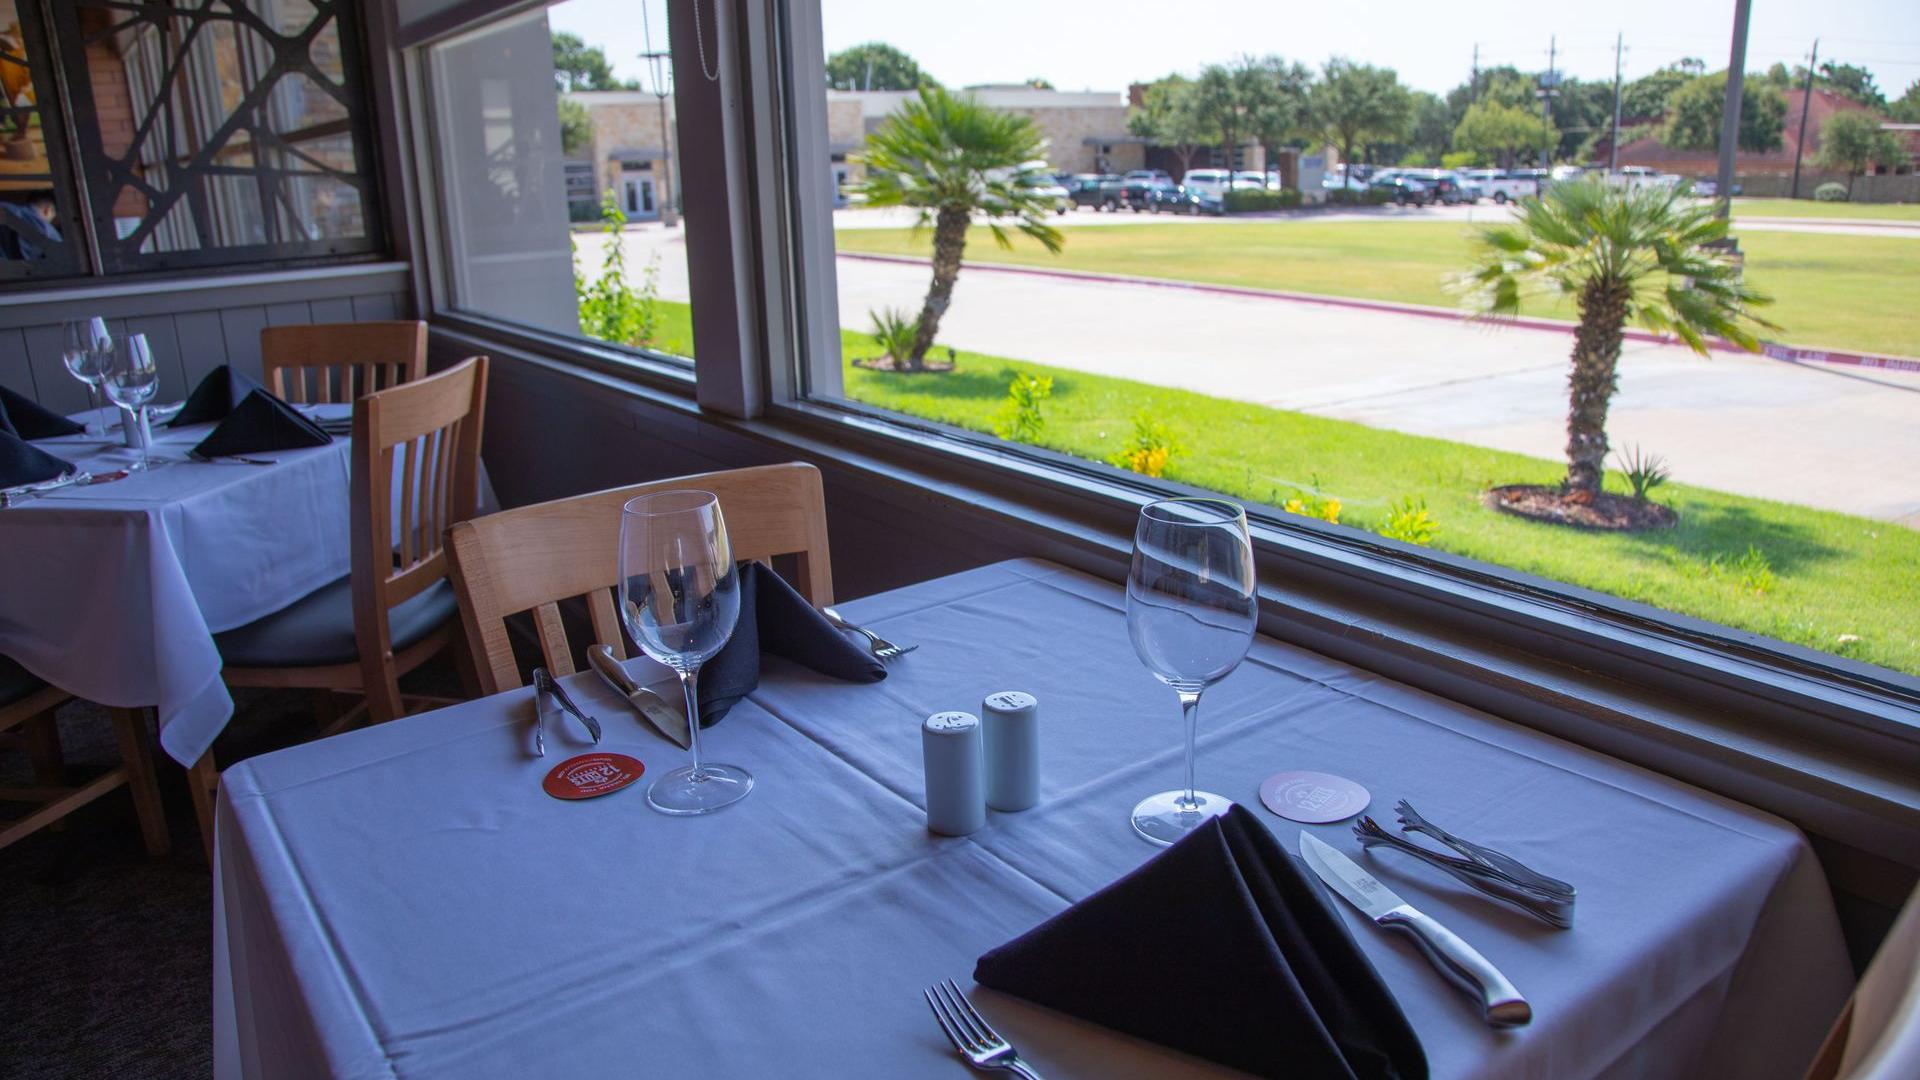 Restaurants with Private Rooms for Rent in Dallas, TX